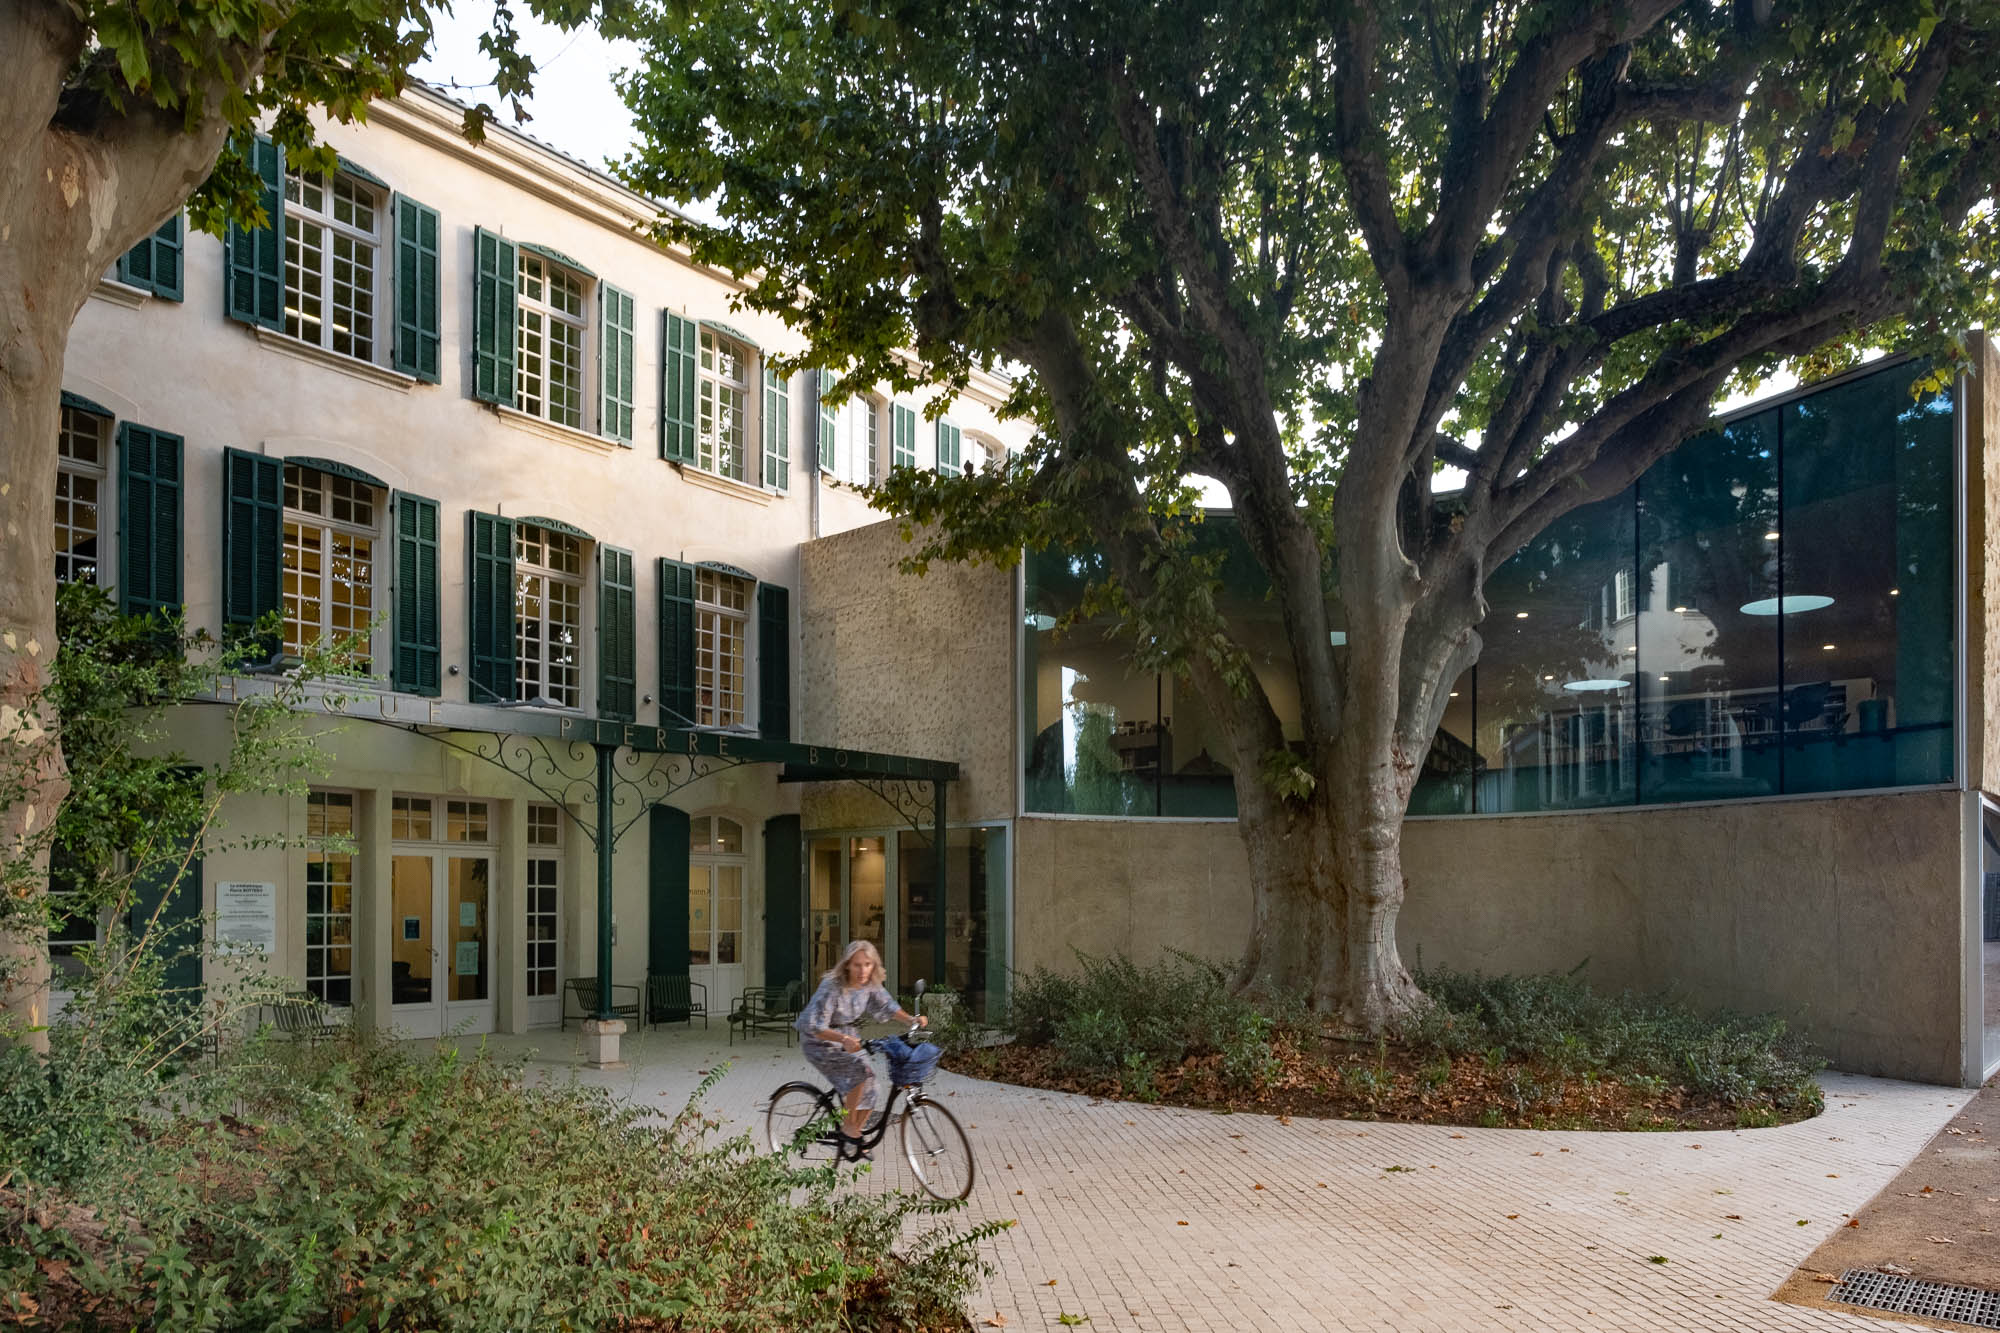 Exterior of an old house converted to a library. The original building to the left is a three-story house with green shutters and a wrought iron pergola. The modern wing of the library to the right has a curved wall and window to accommodate a large mature tree growing in front of the house. A person on a bicycle moves through the scene.